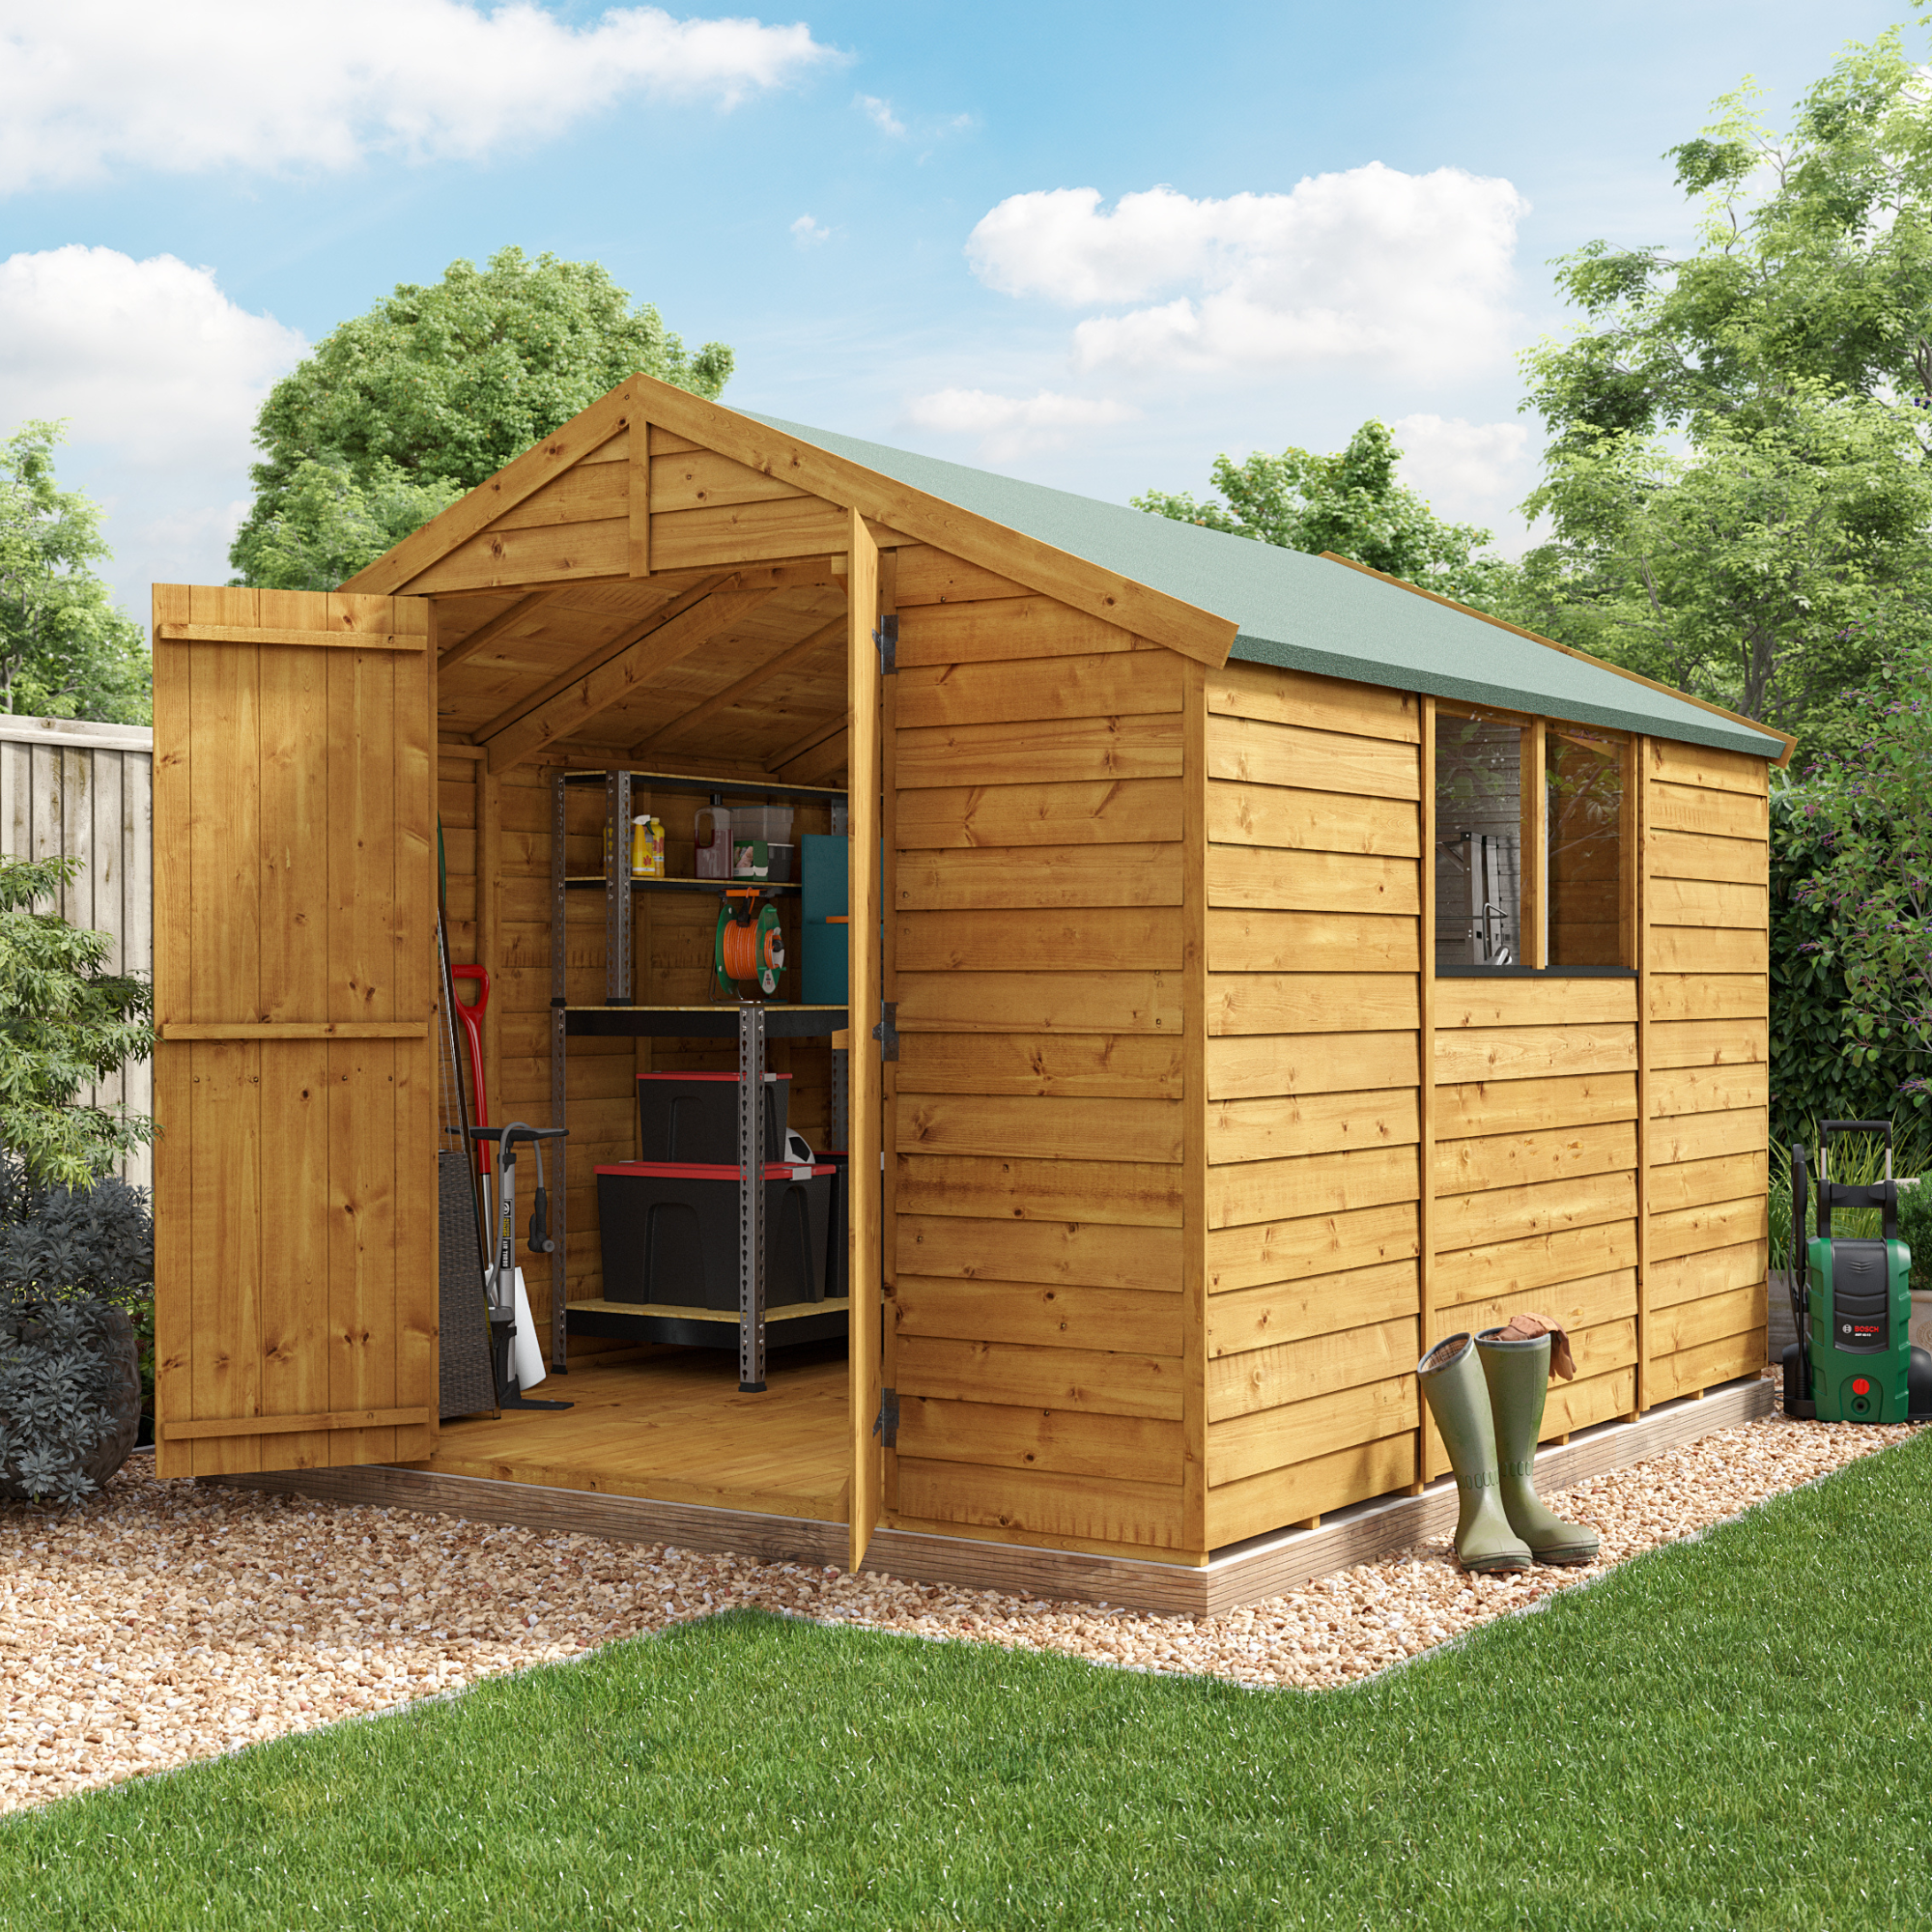 10 x 8 Pressure Treated Shed - BillyOh Keeper Overlap Apex Wooden Shed - Windowed 10x8 Garden Shed